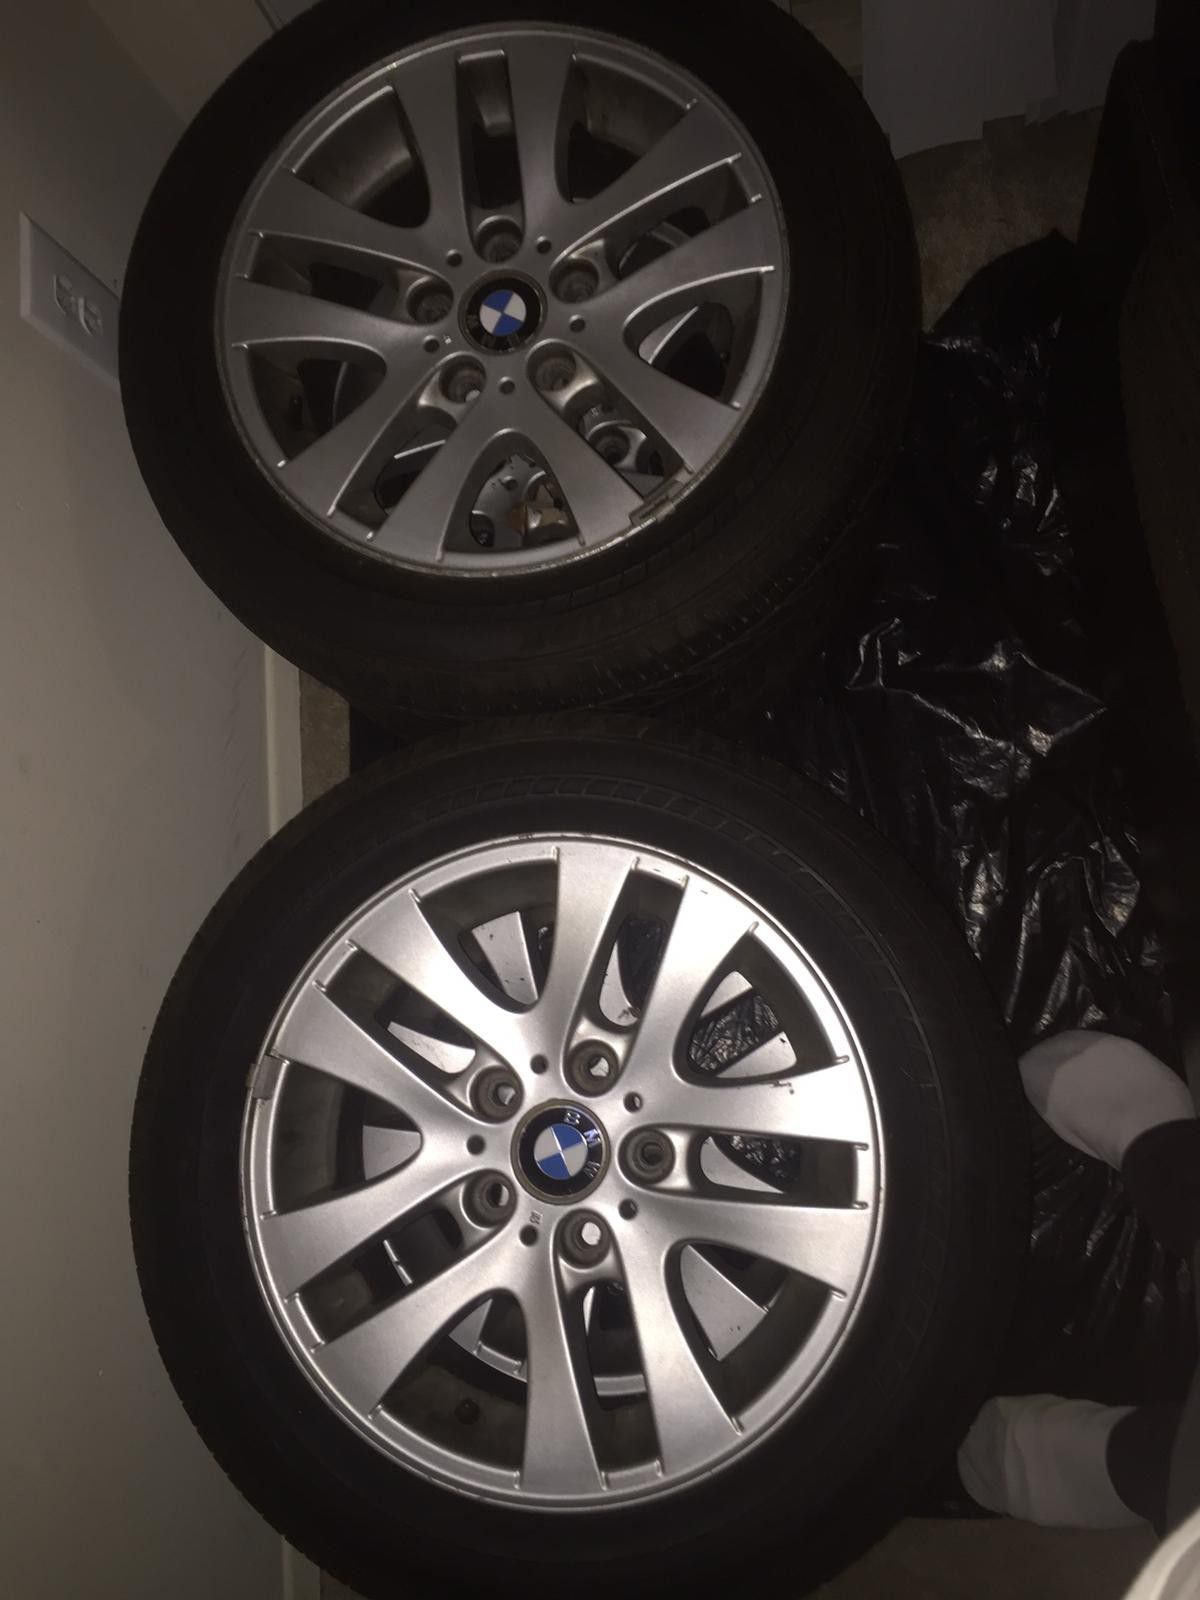 BMW 2007 tires .All good .